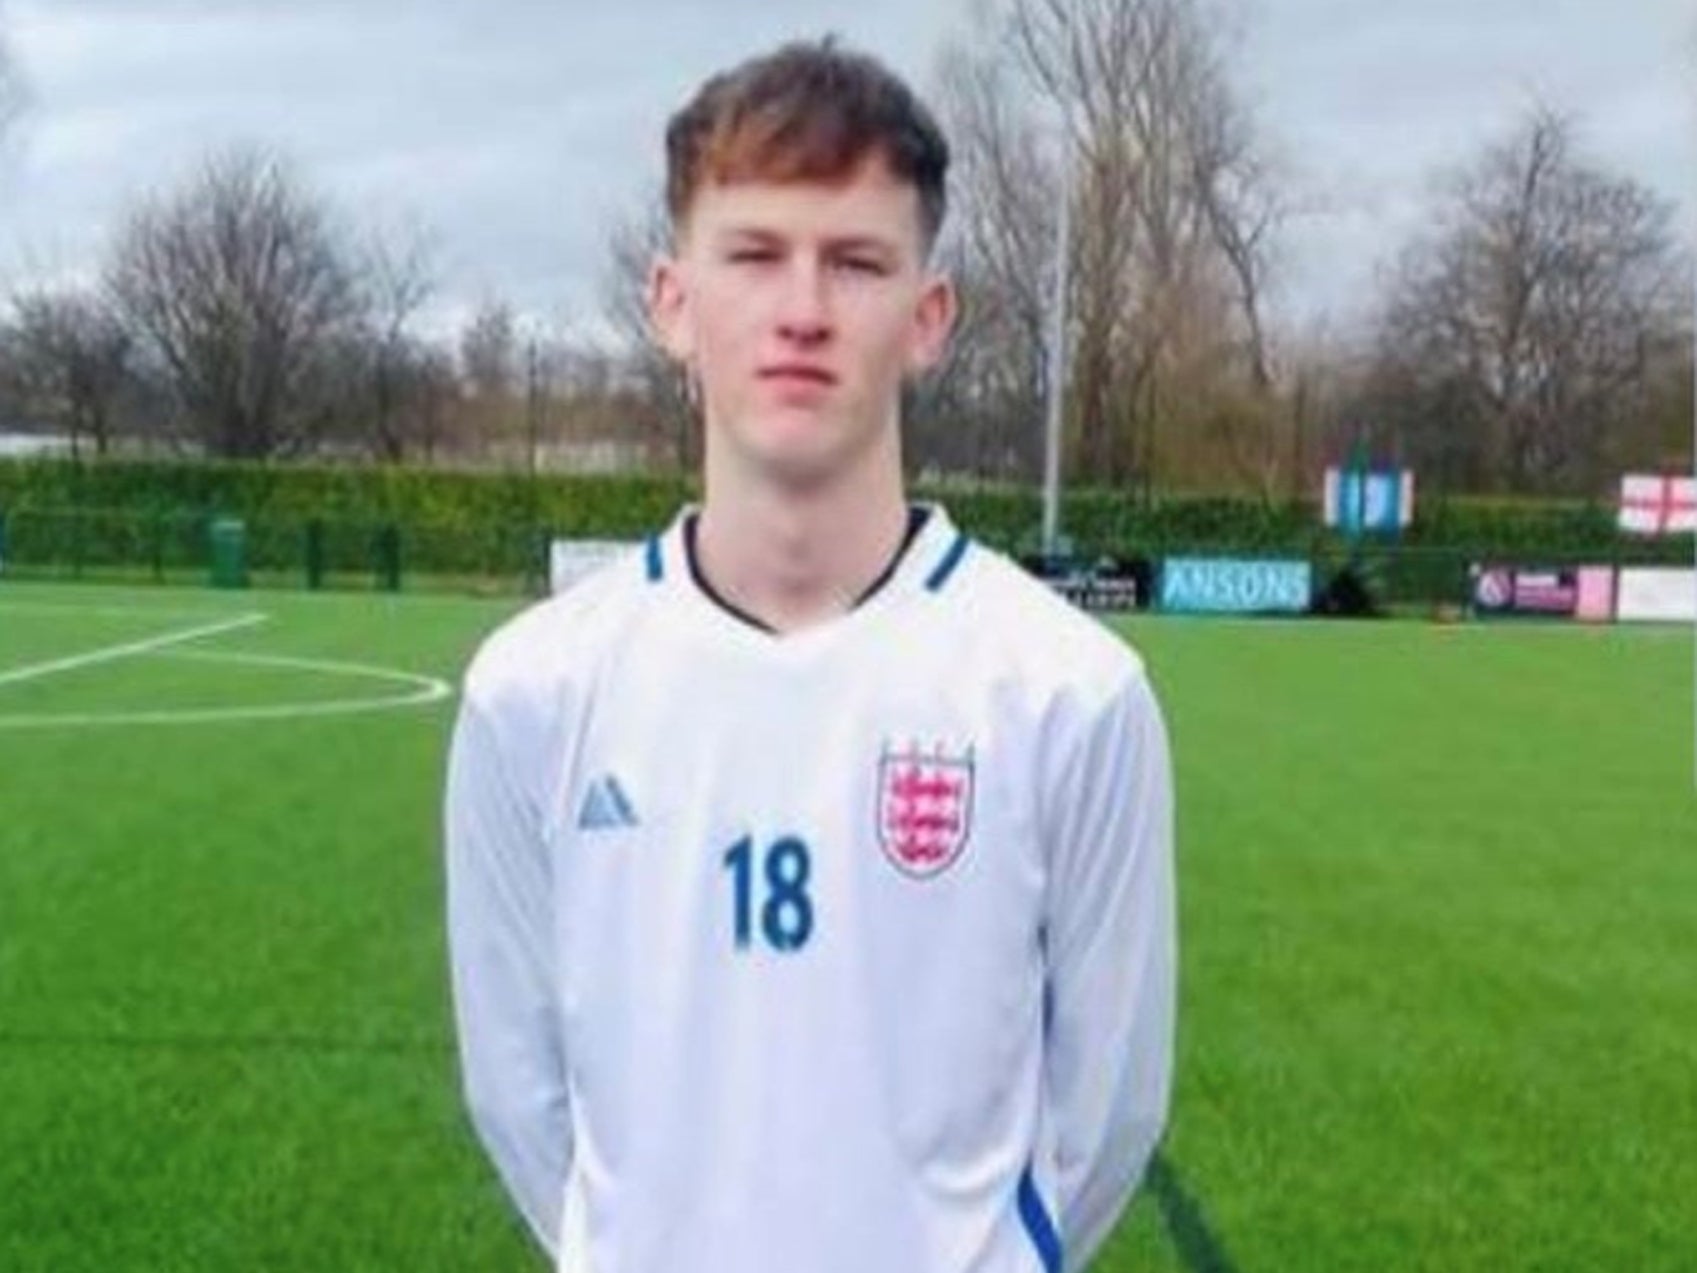 Ex-England schoolboy footballer Sam Harding, 20, has died after being hit by a vehicle at a car meet